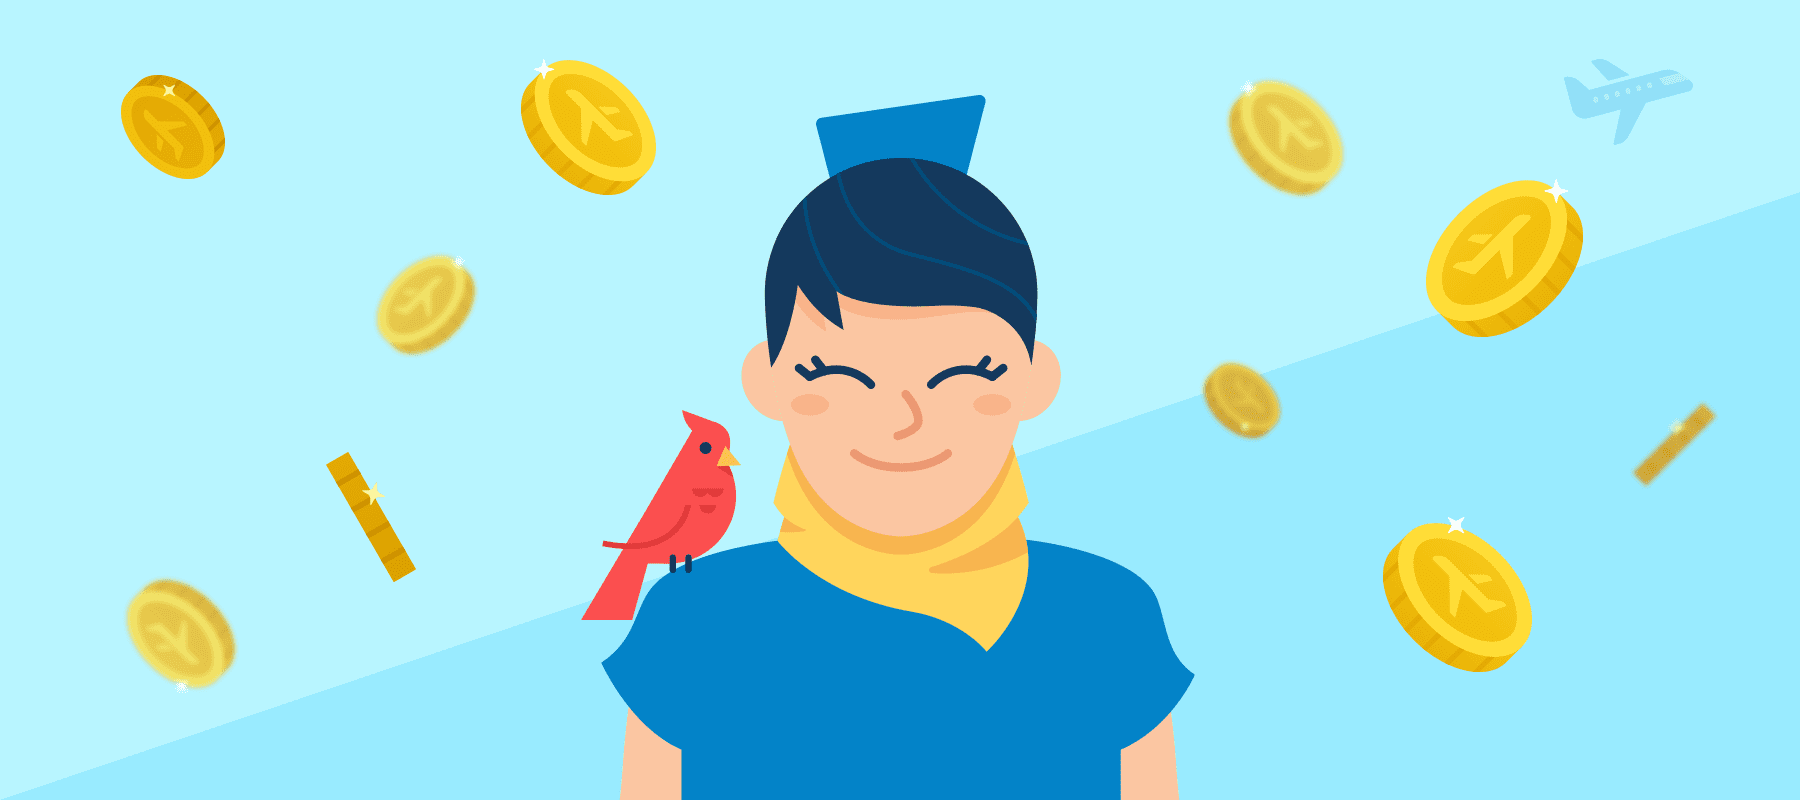 Flight attendant with coins illustration free